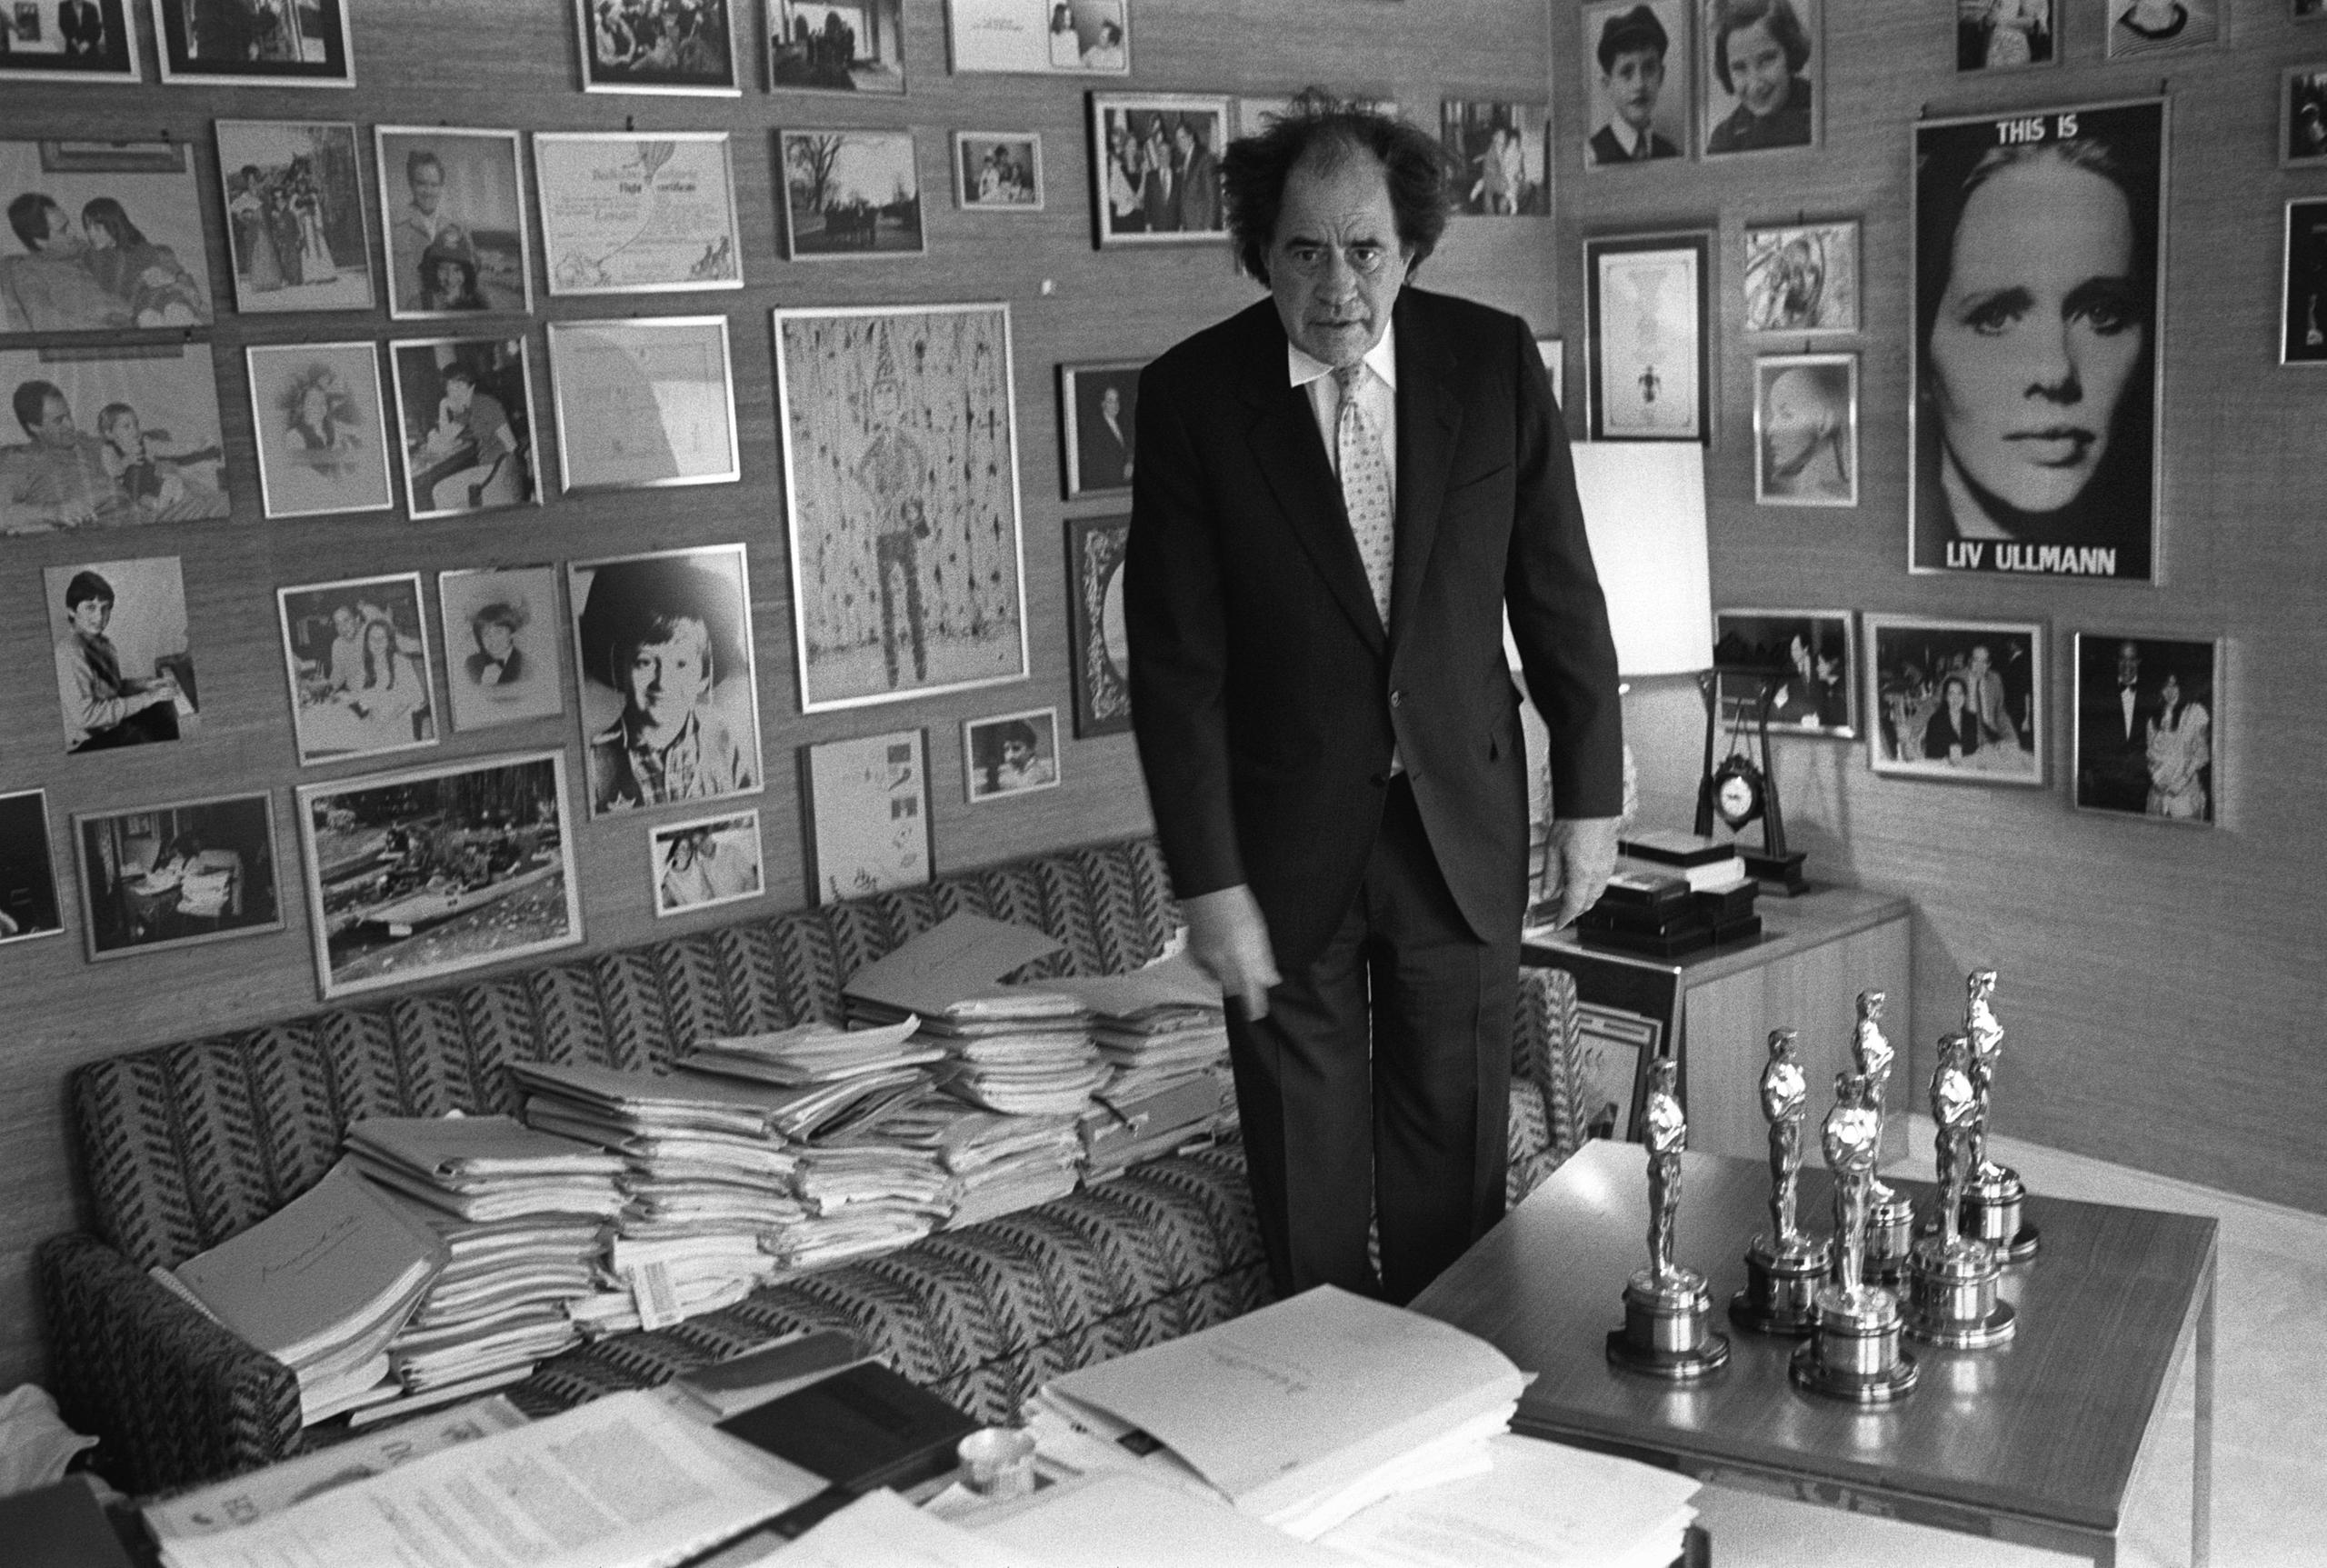 Arthur Cohn stands in a room full of scripts and pictures on the walls